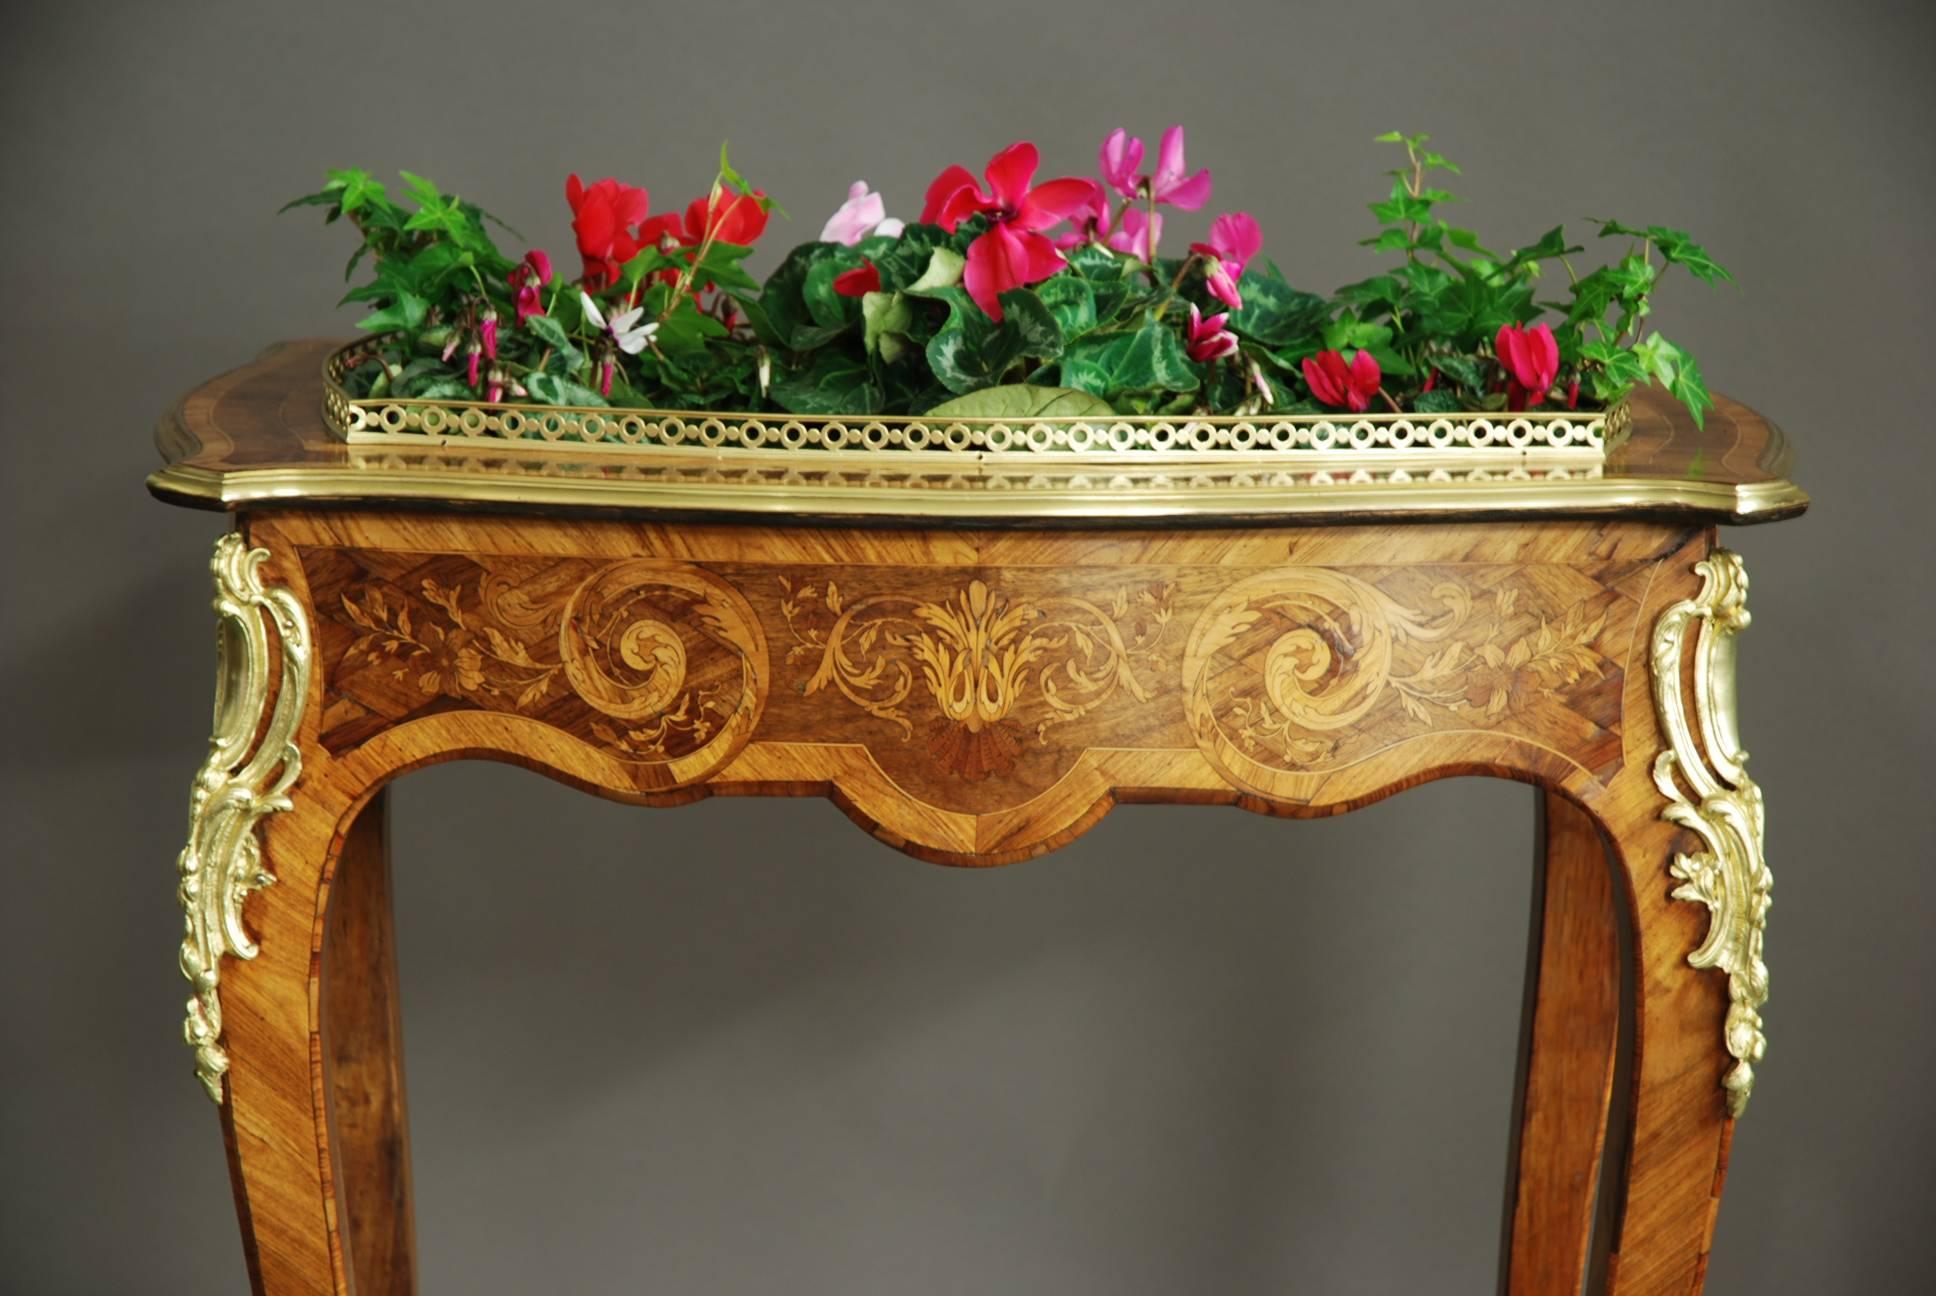 19th Century Edwards & Roberts Inlaid Plant Stand or Jardiniere